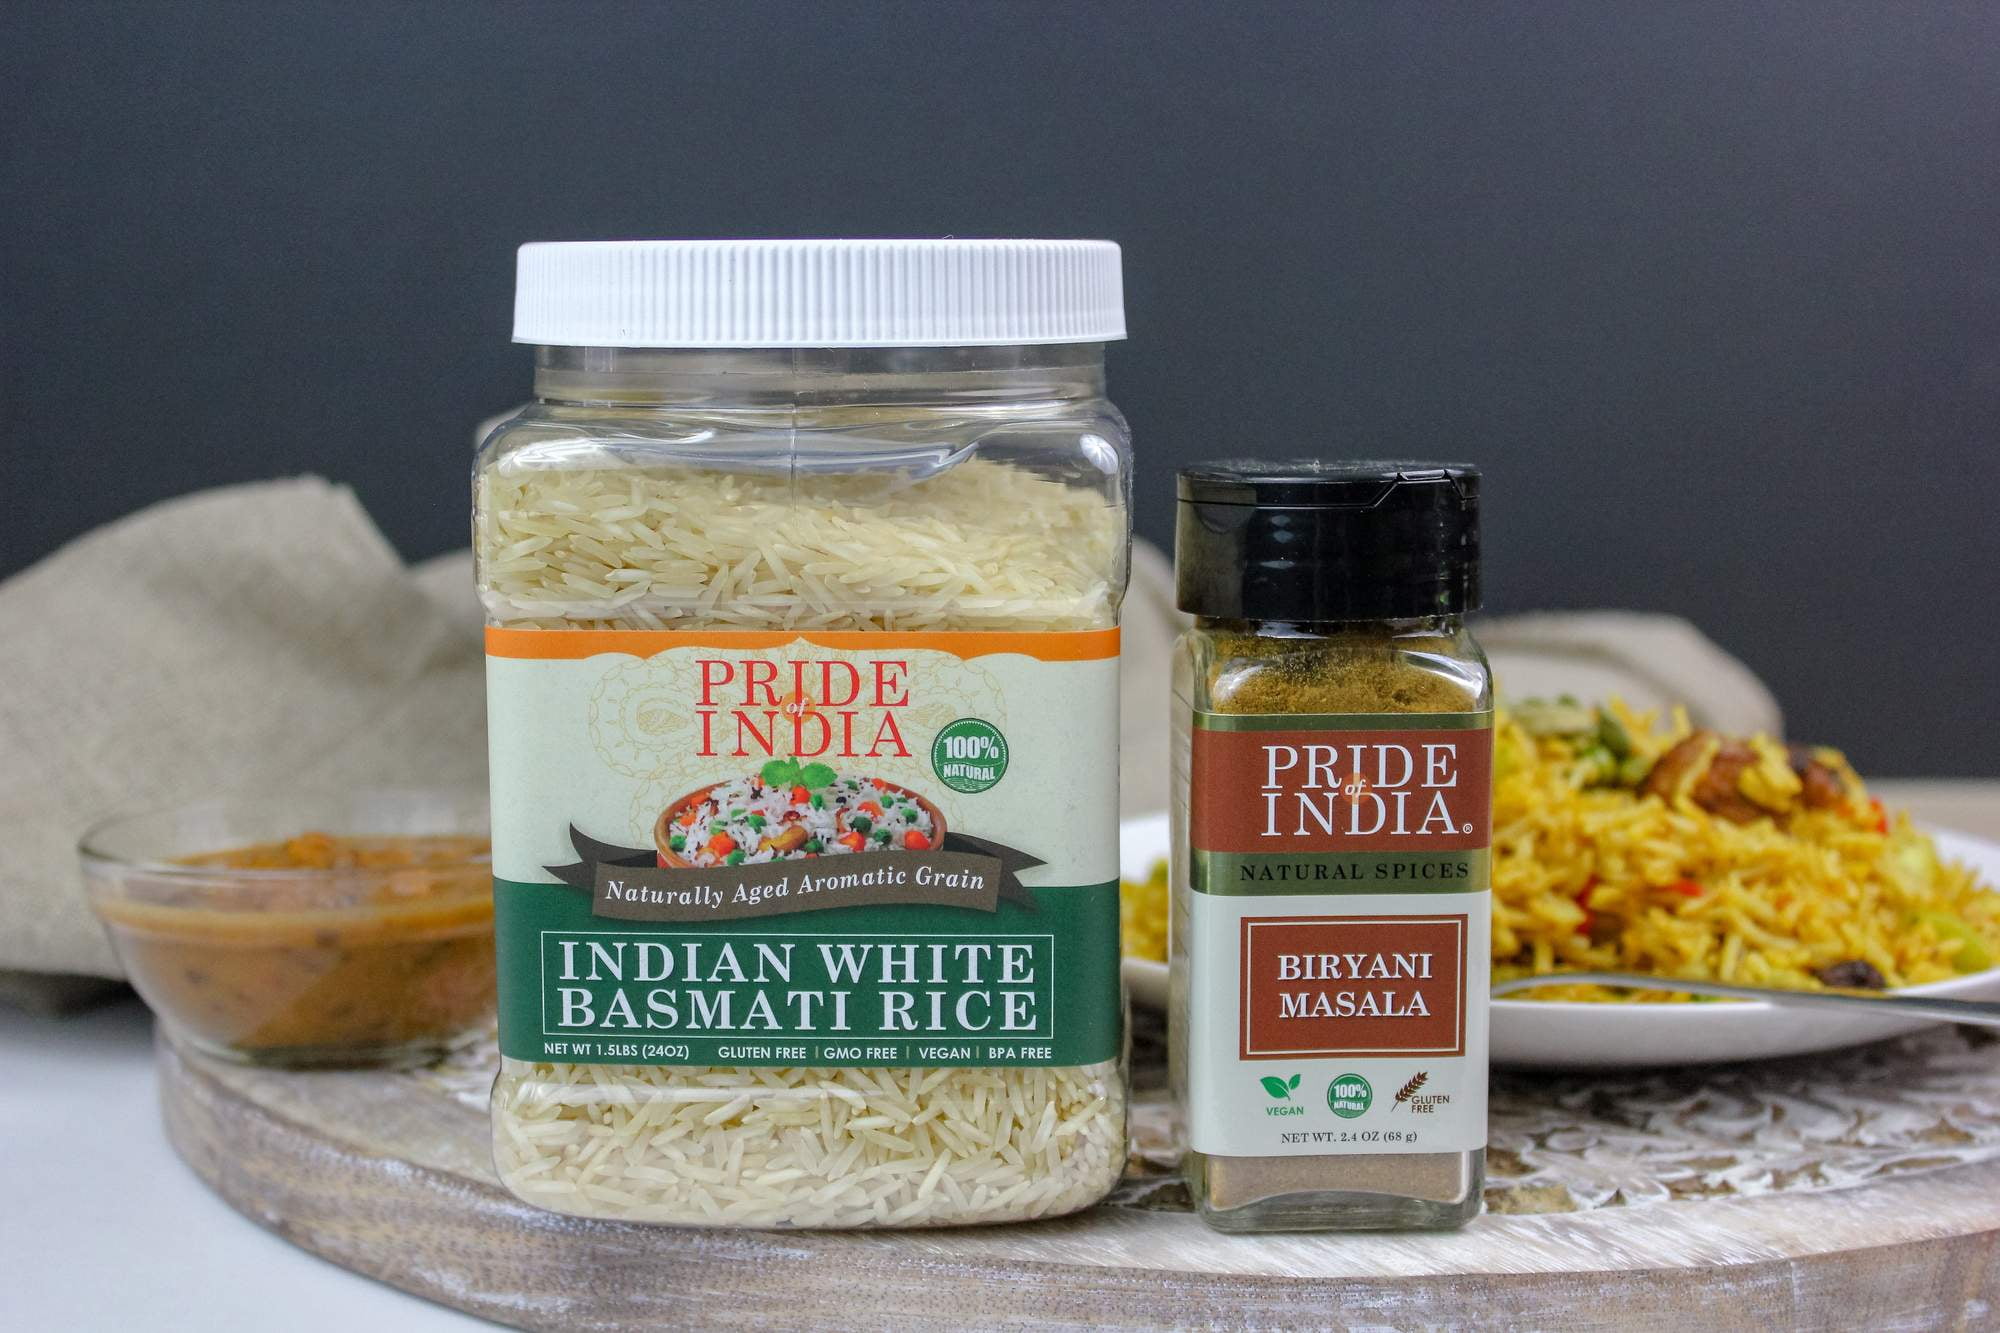 Pride of India - Premium Indian White Basmati Rice - 3.3 lbs (1.5 kg) Jar -  Unique & Nutty Flavored Extra Long, Non-Sticky & Slender Grain - Used to  make Biryanis, Pilaf, Pudding etc., - Walmart.com